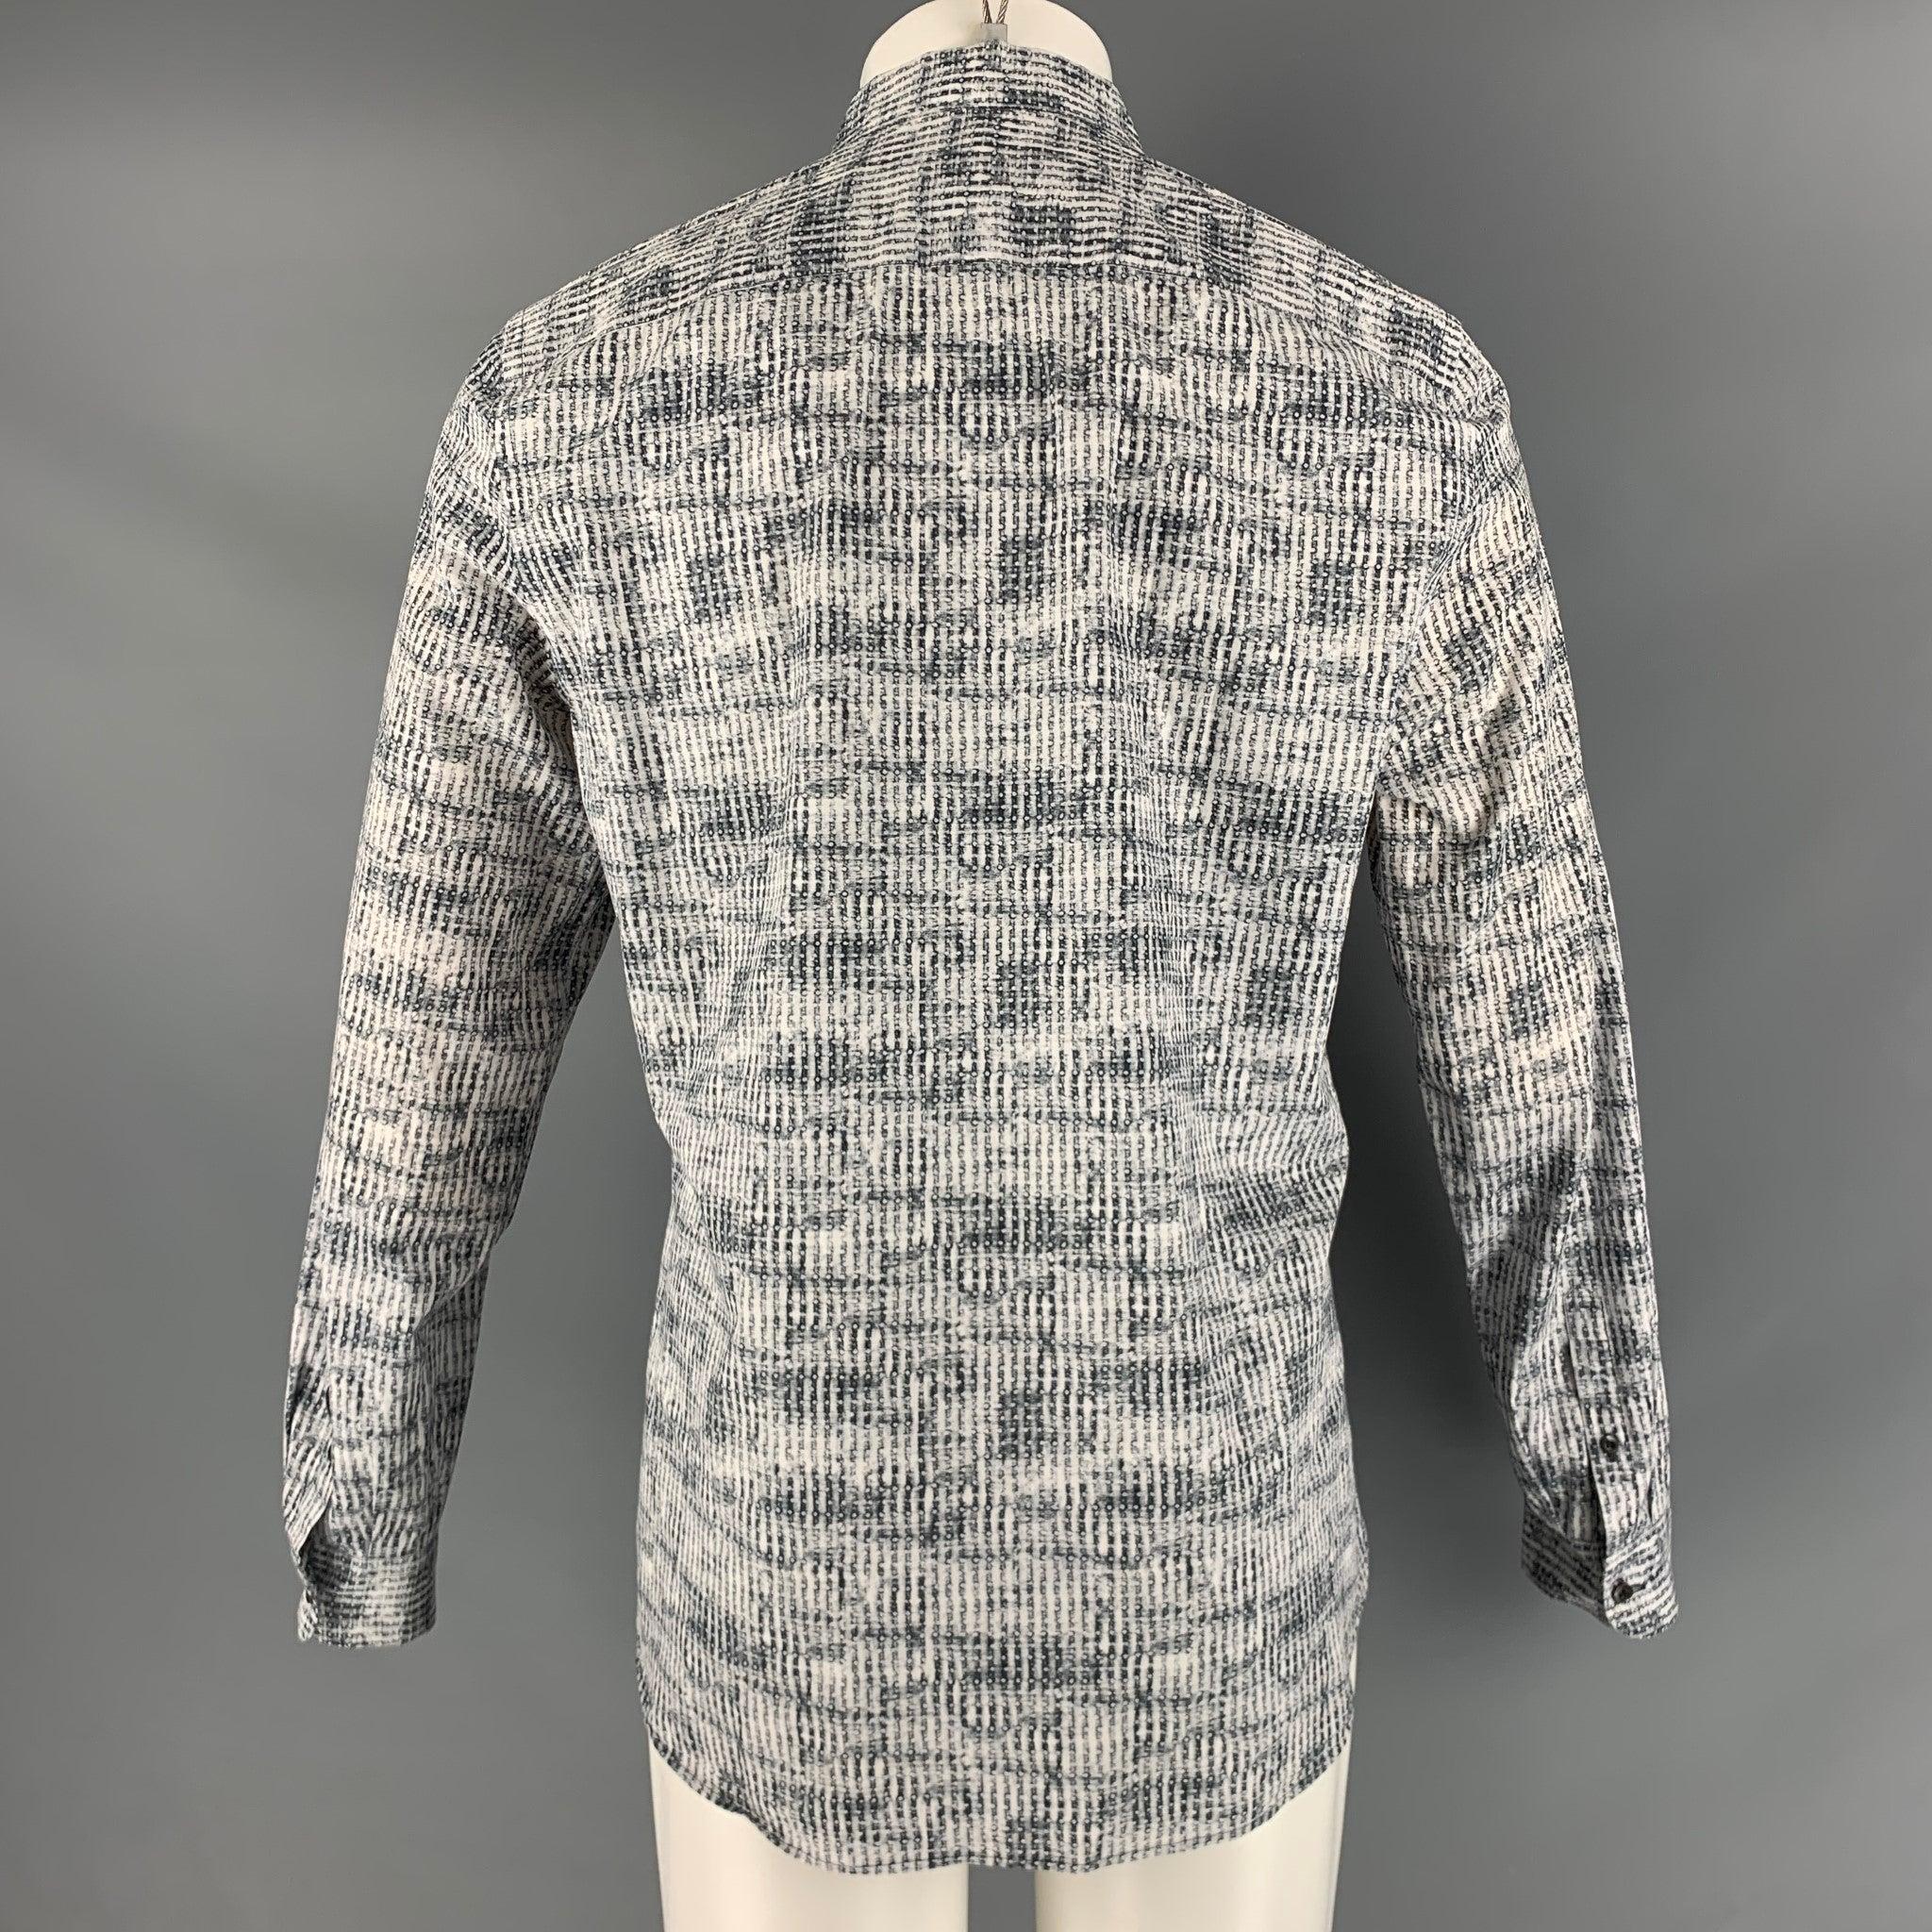 PRADA Size S White Grey Print Cotton Button Up Long Sleeve Shirt In Excellent Condition For Sale In San Francisco, CA